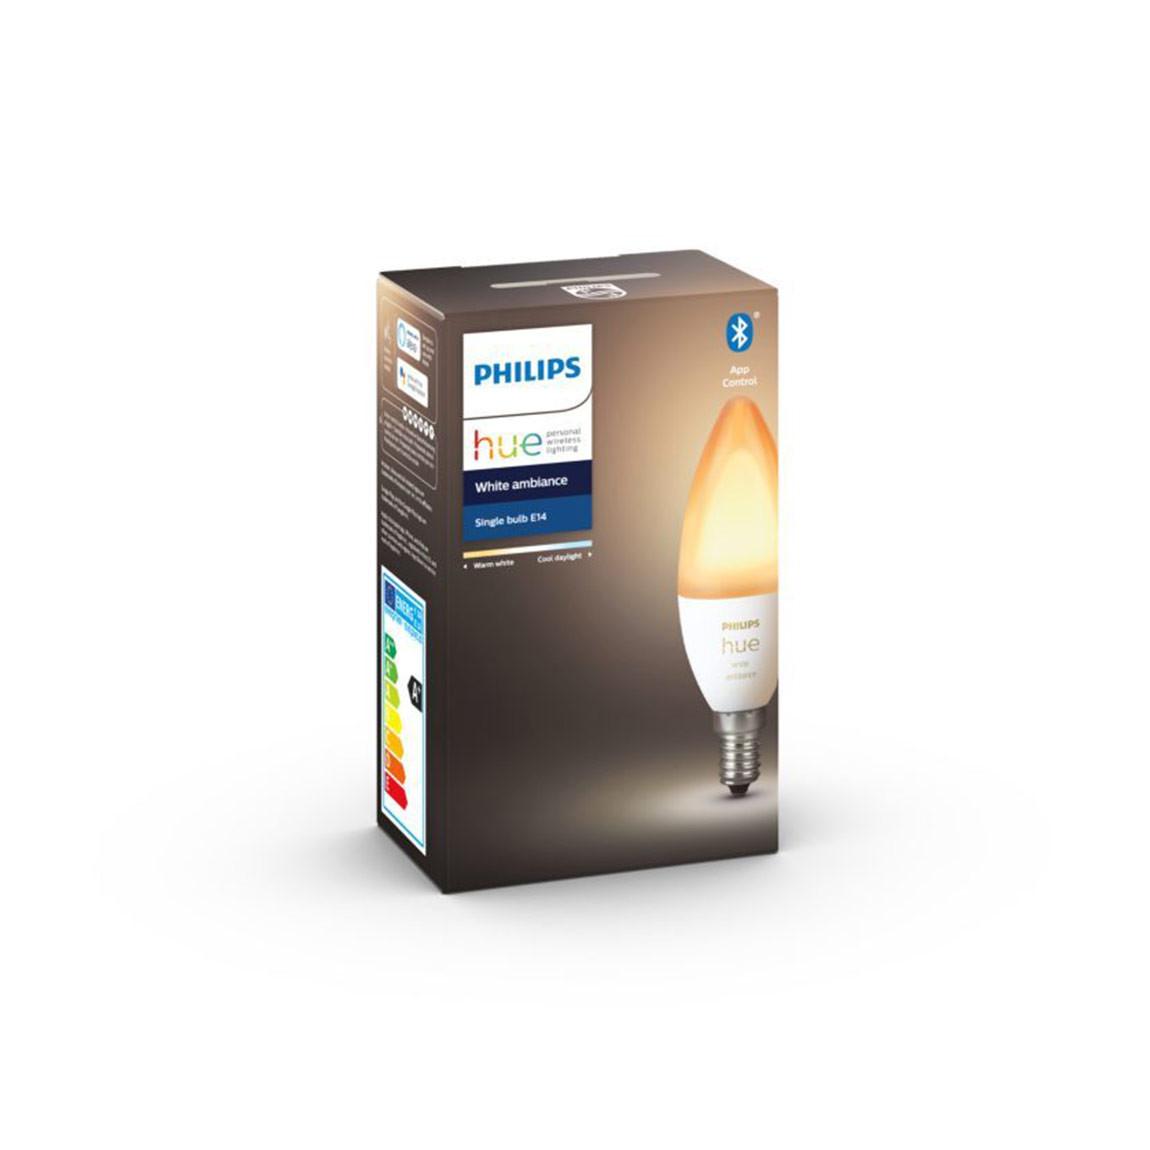 Philips Hue White Ambiance E14 - Verpackung